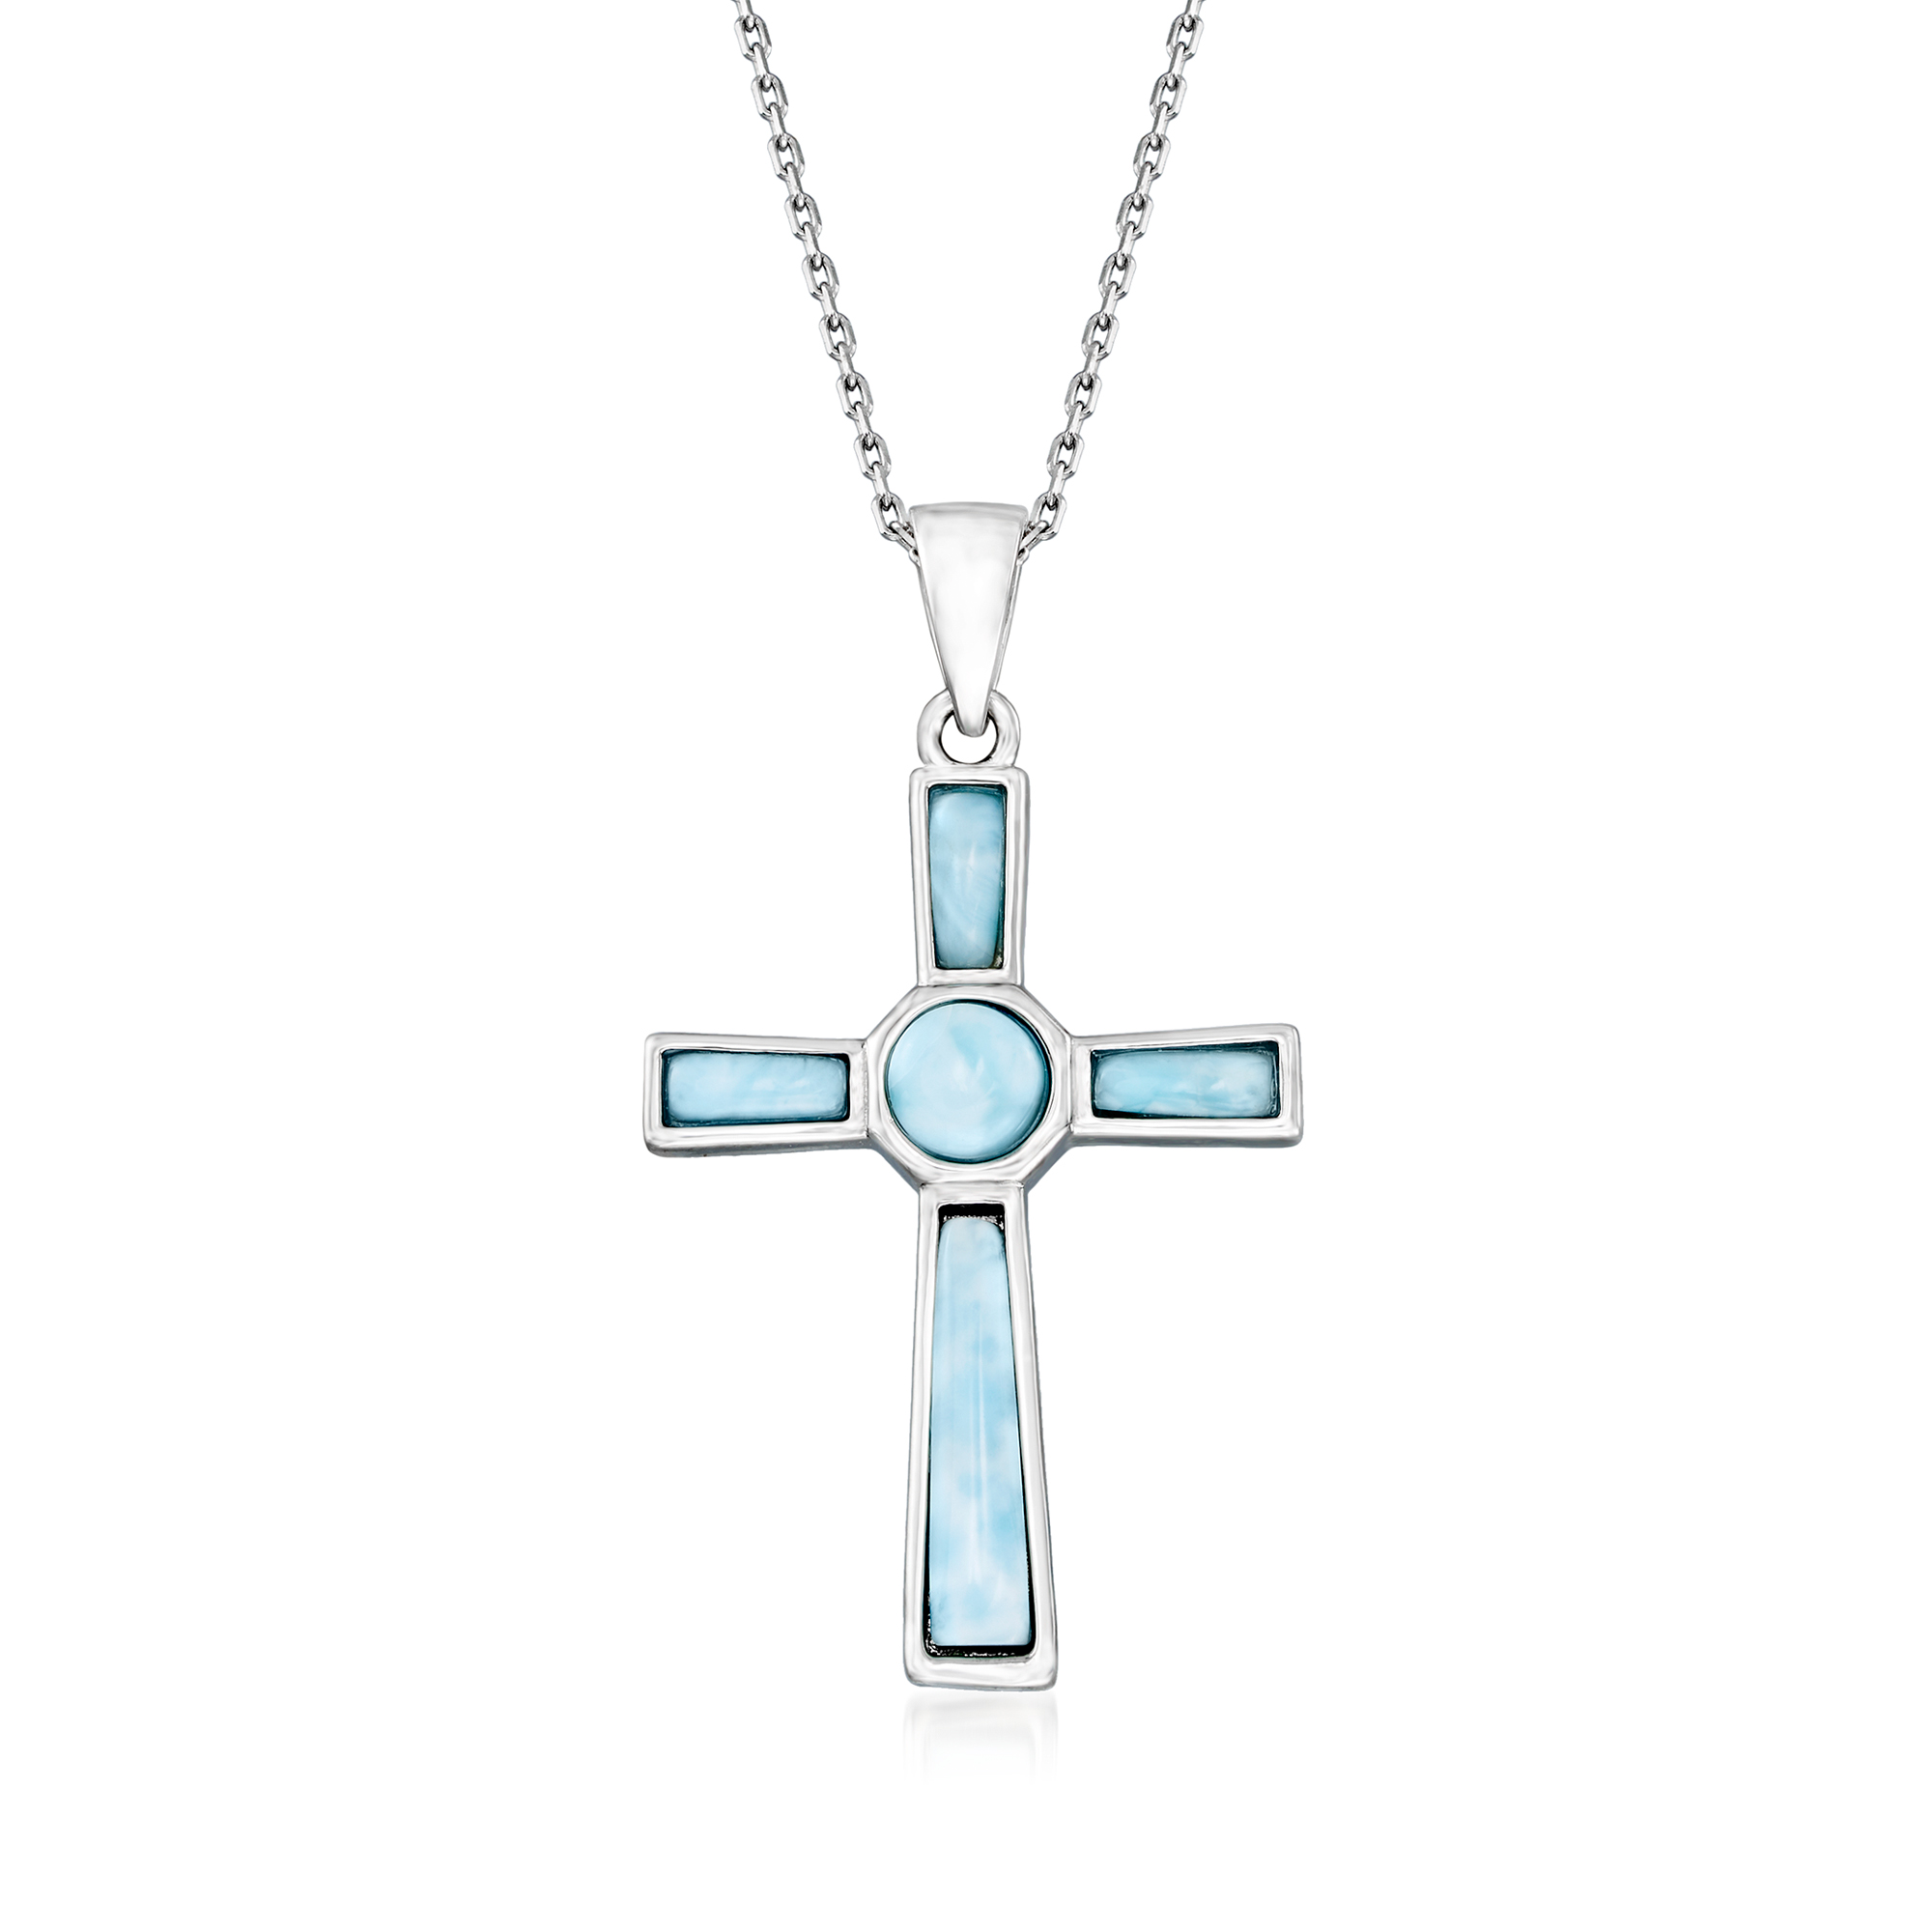 Larimar Cross Pendant Necklace in Sterling Silver. 18